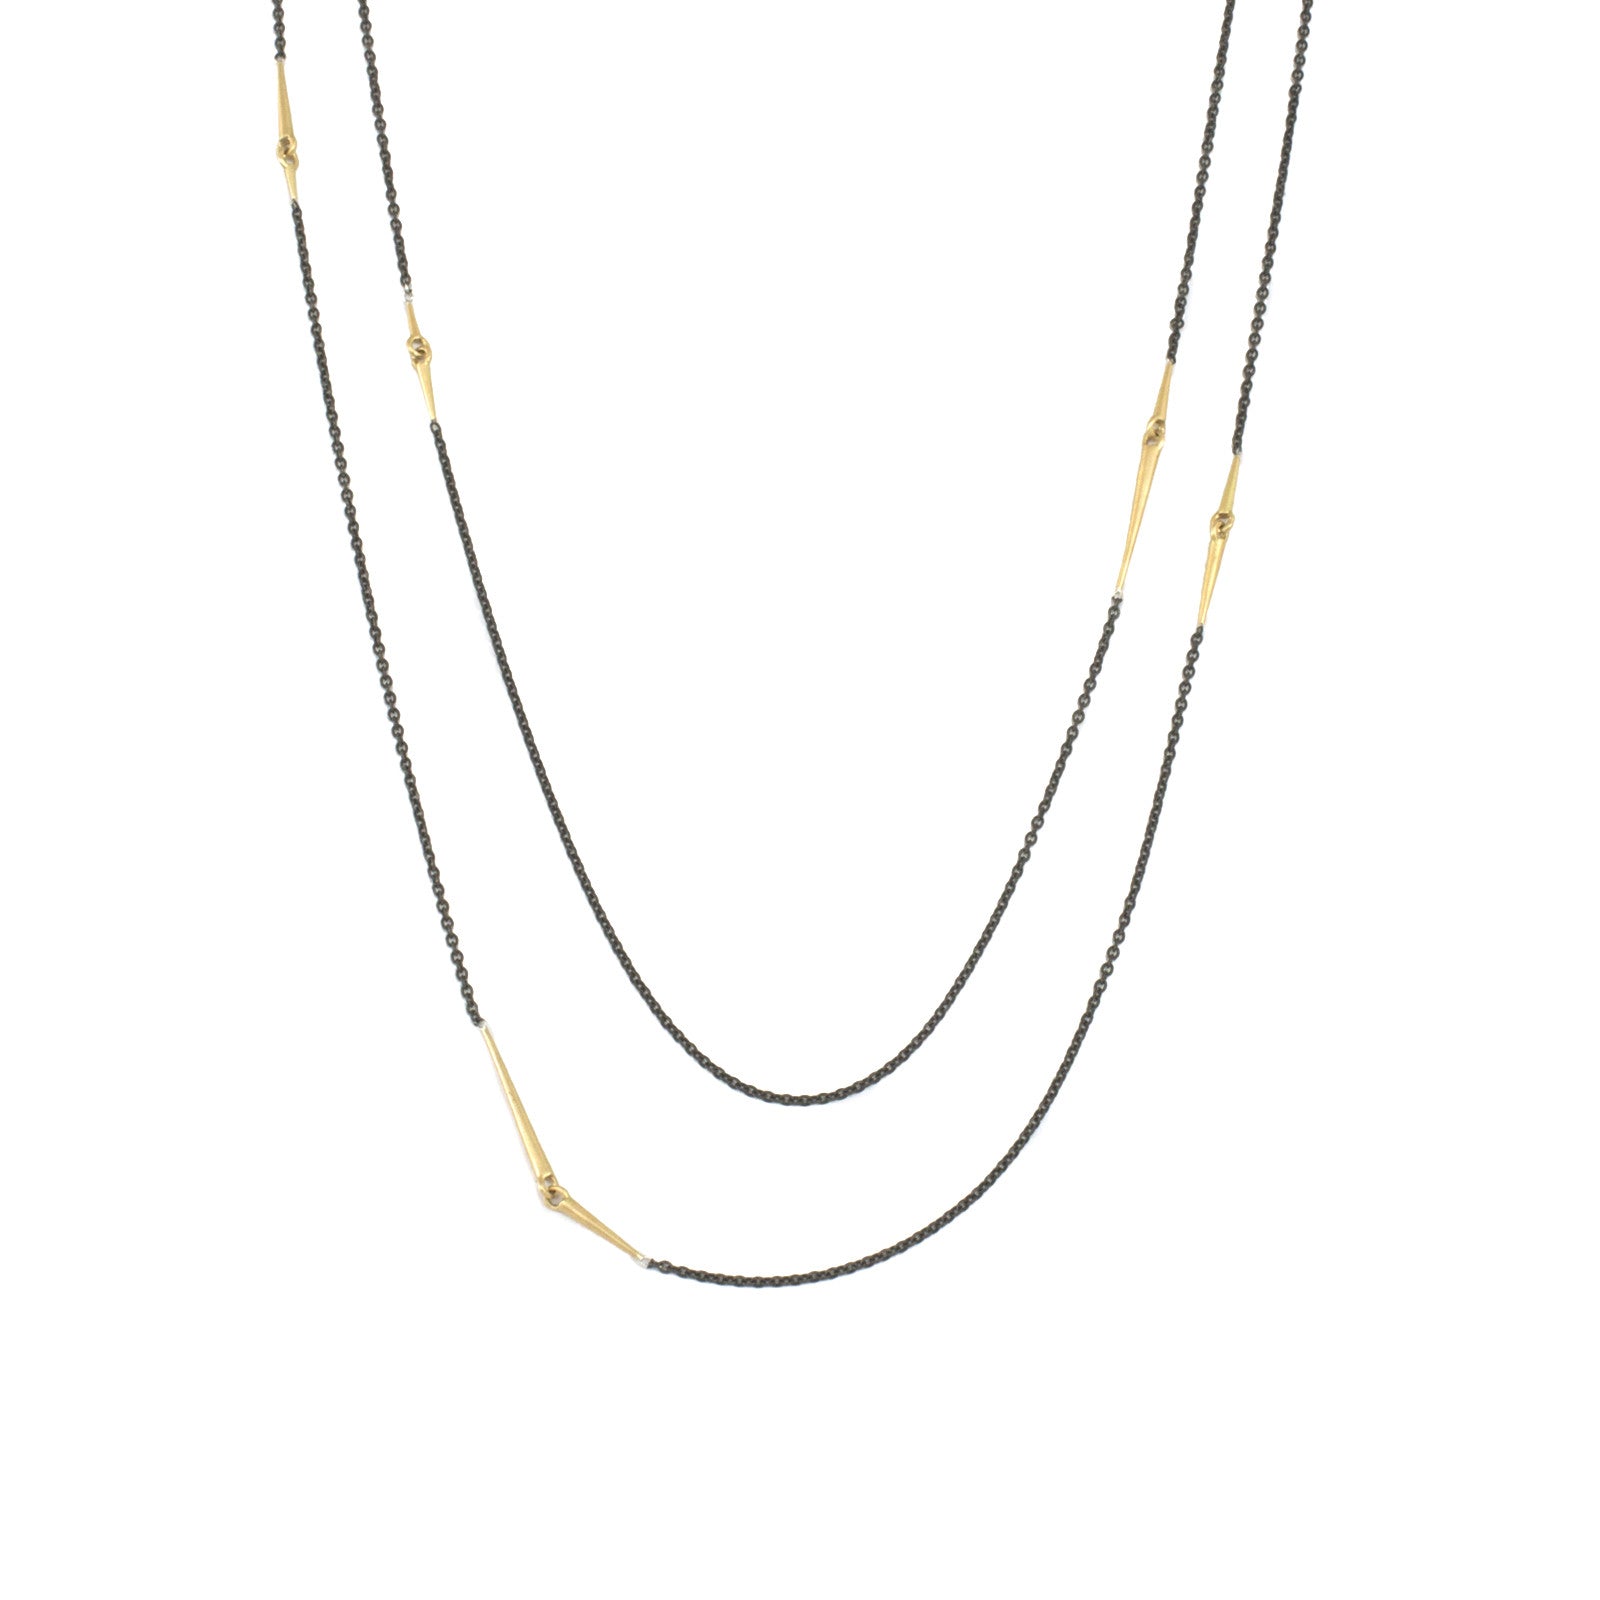 18k yellow gold/oxidized silver chain long mirrored points necklace